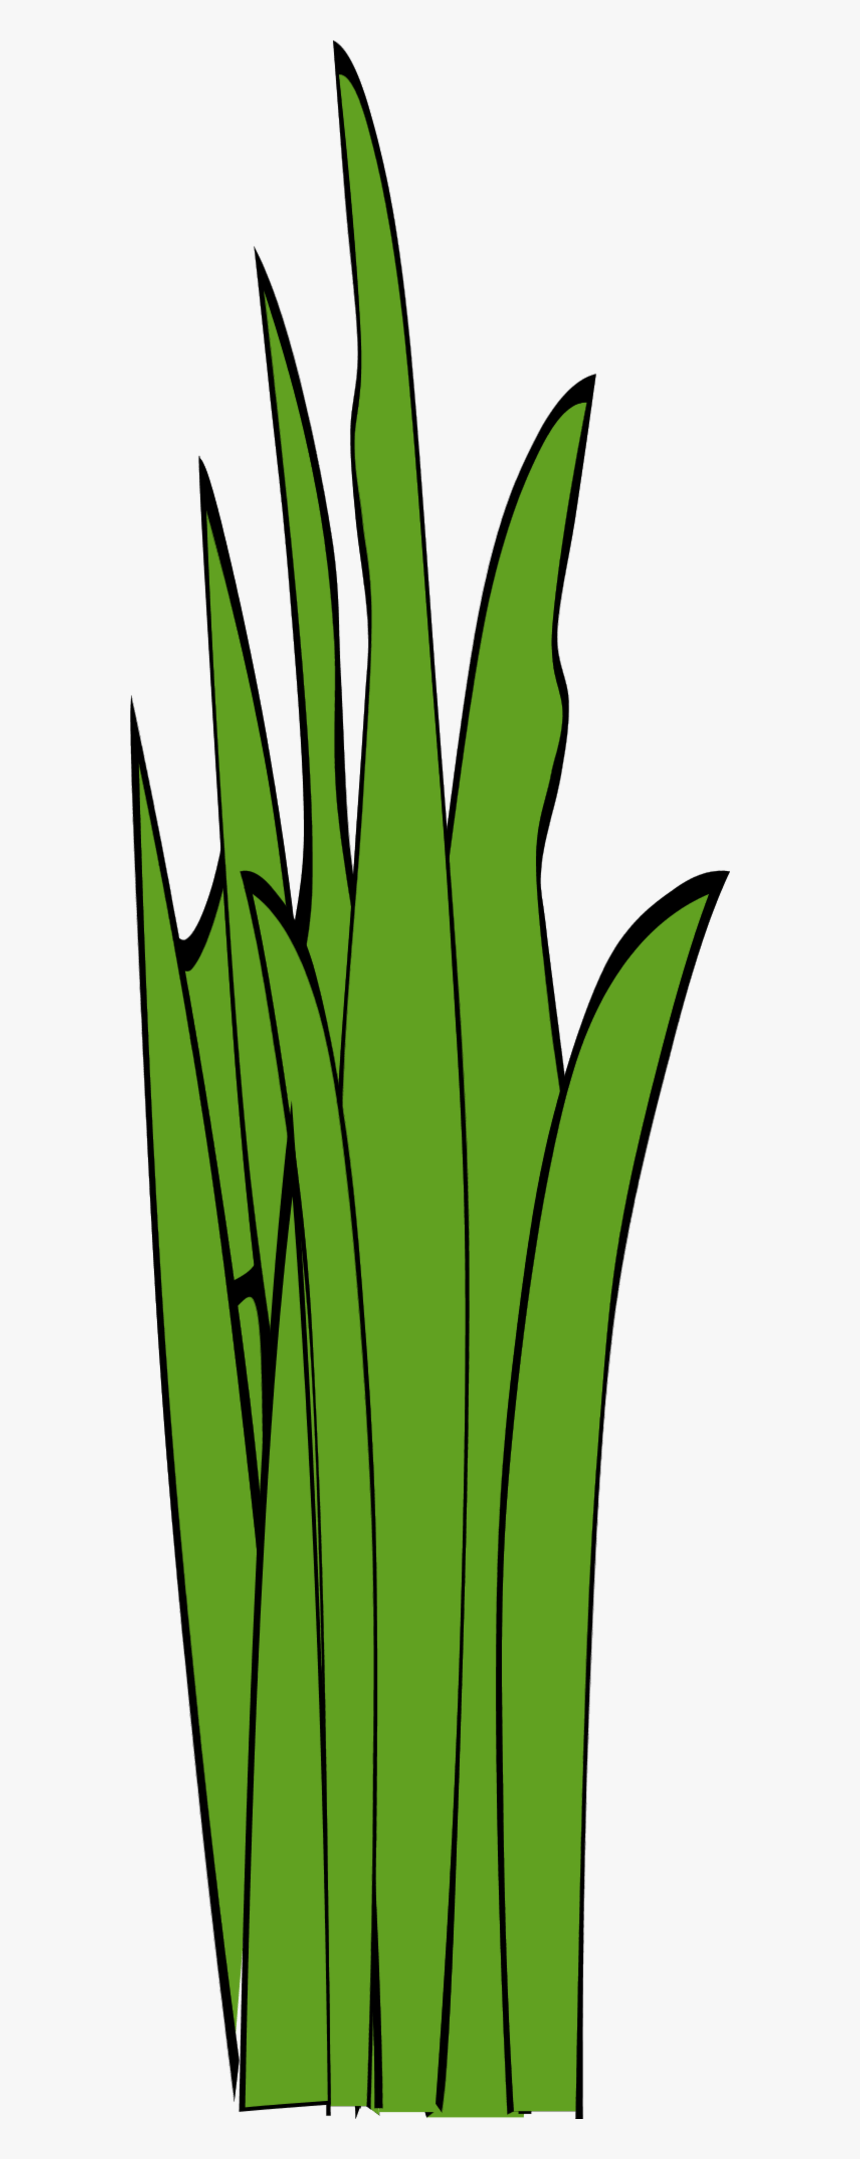 Grass Blades And Clumps - Long Grass Clipart, HD Png Download, Free Download